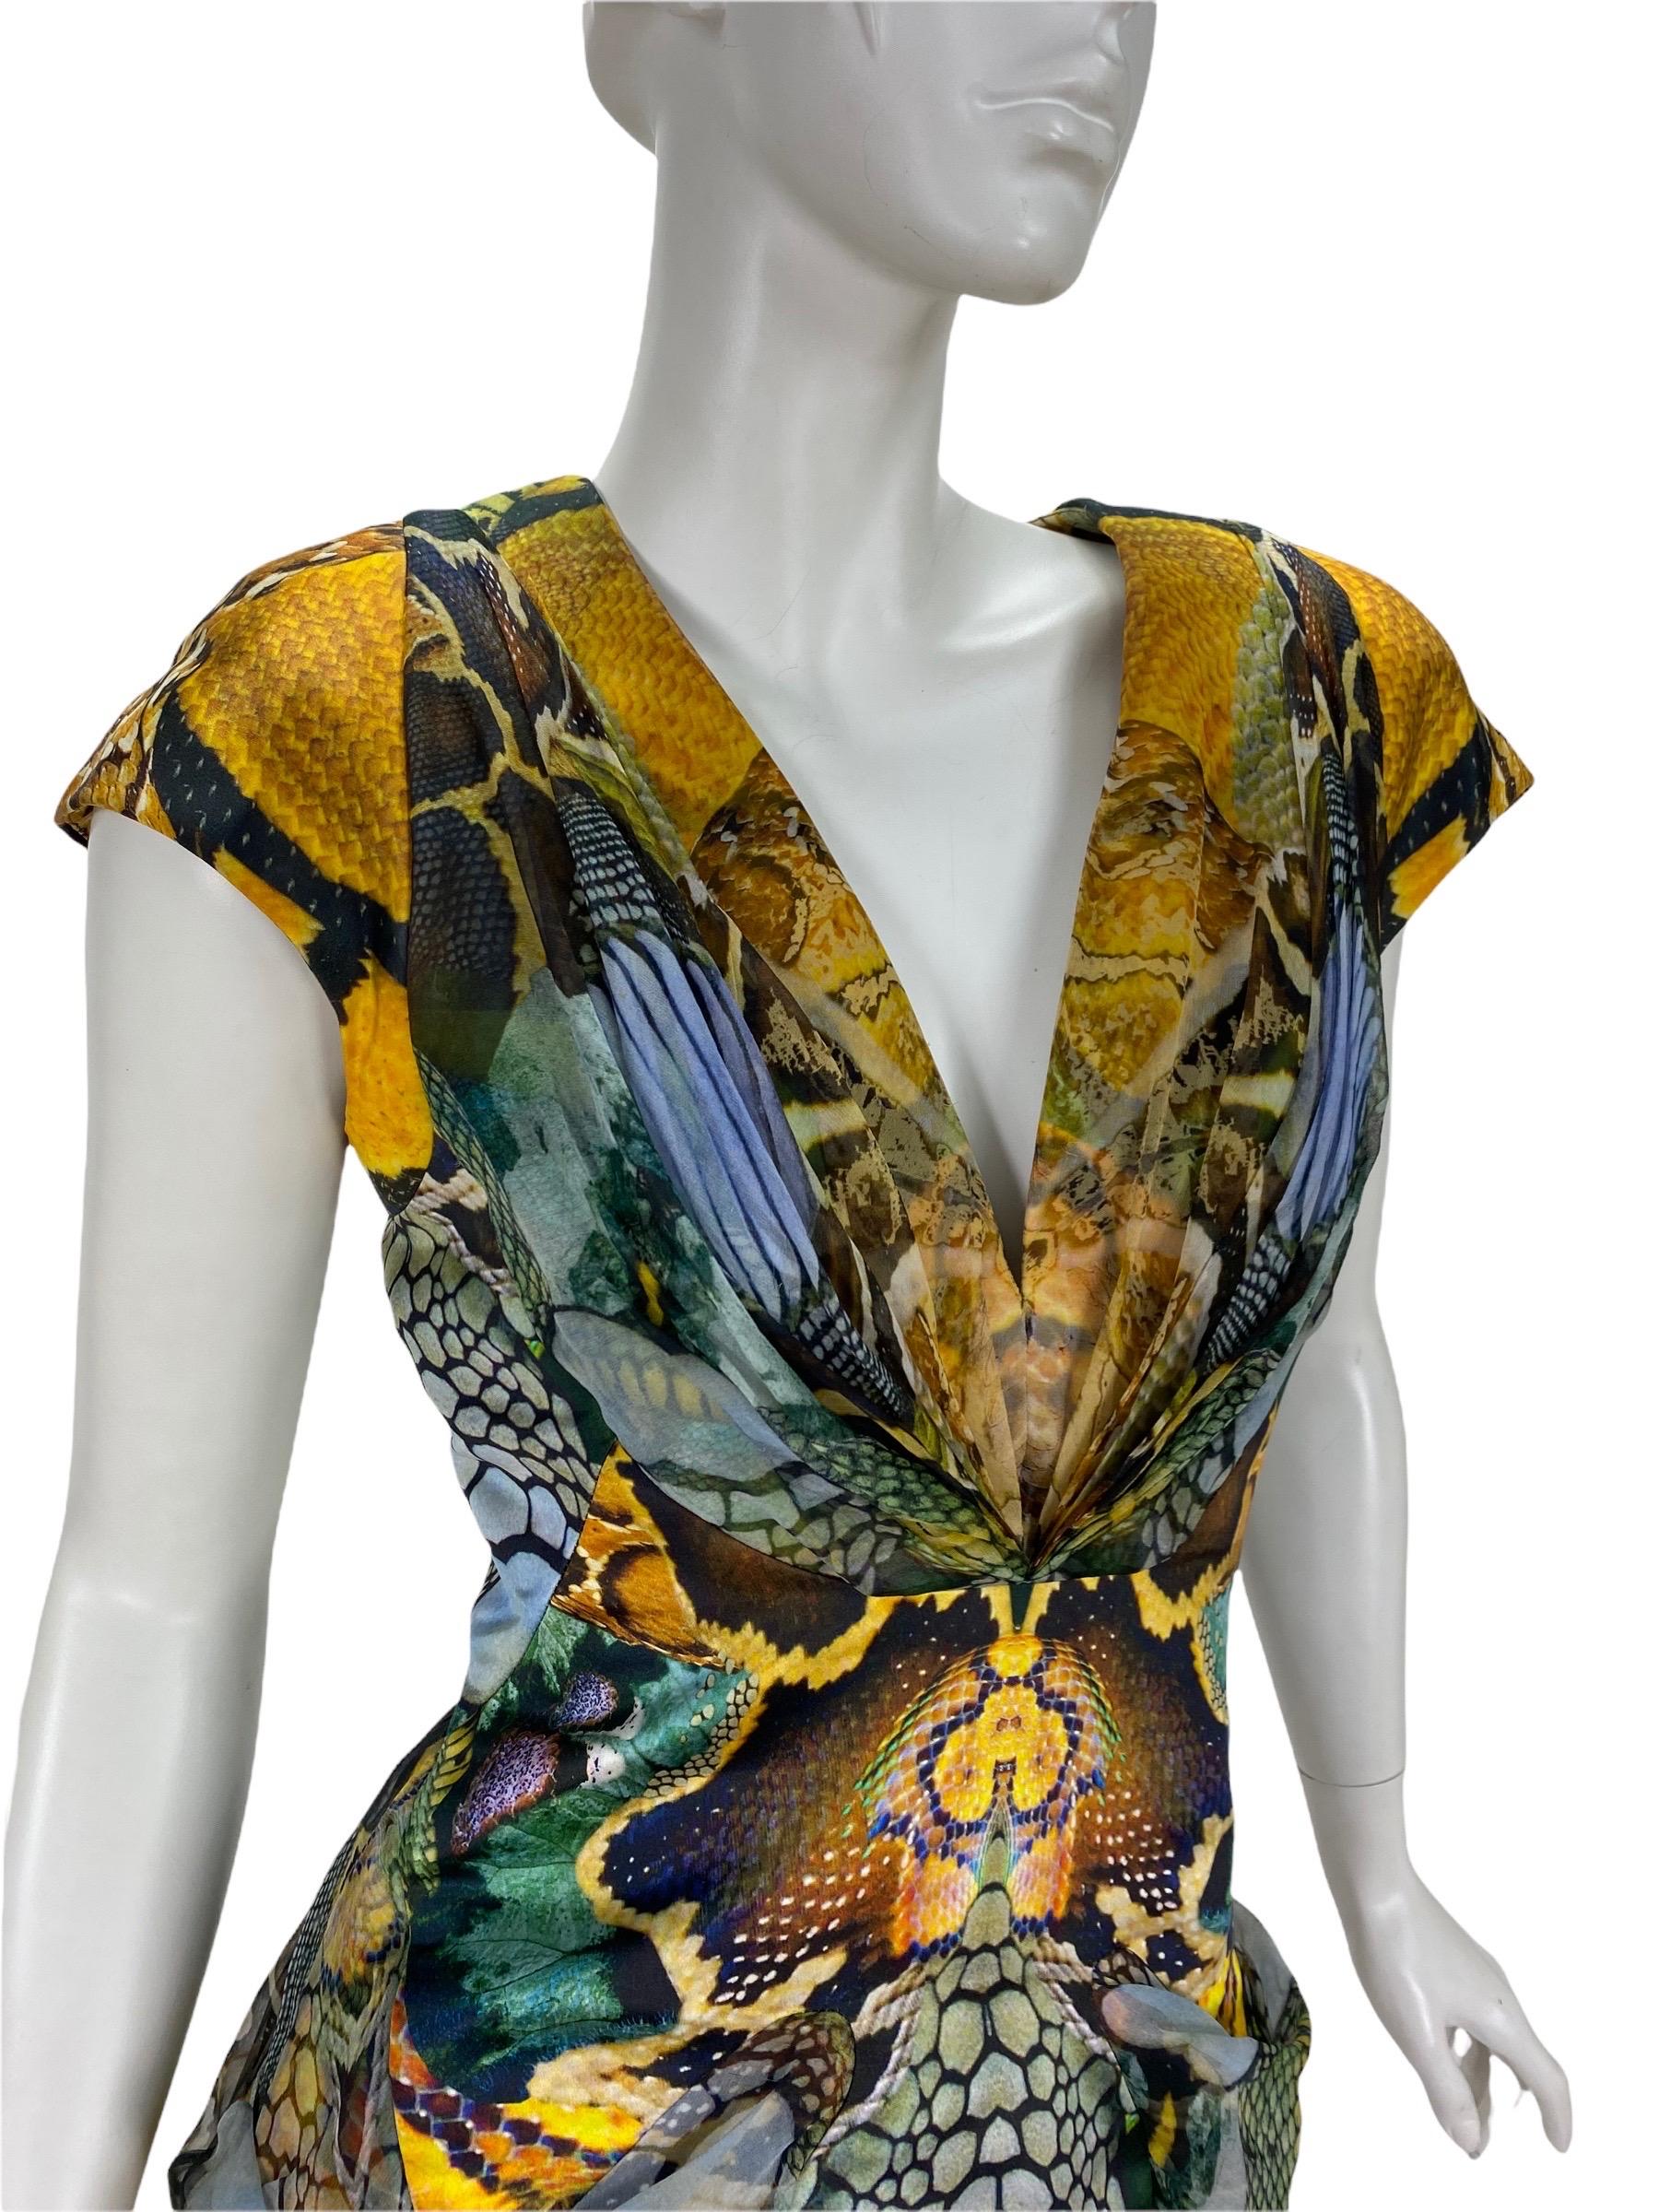 Black Wikipedia featured Alexander McQueen S/S 2010 Collection Mini Dress size 40 For Sale